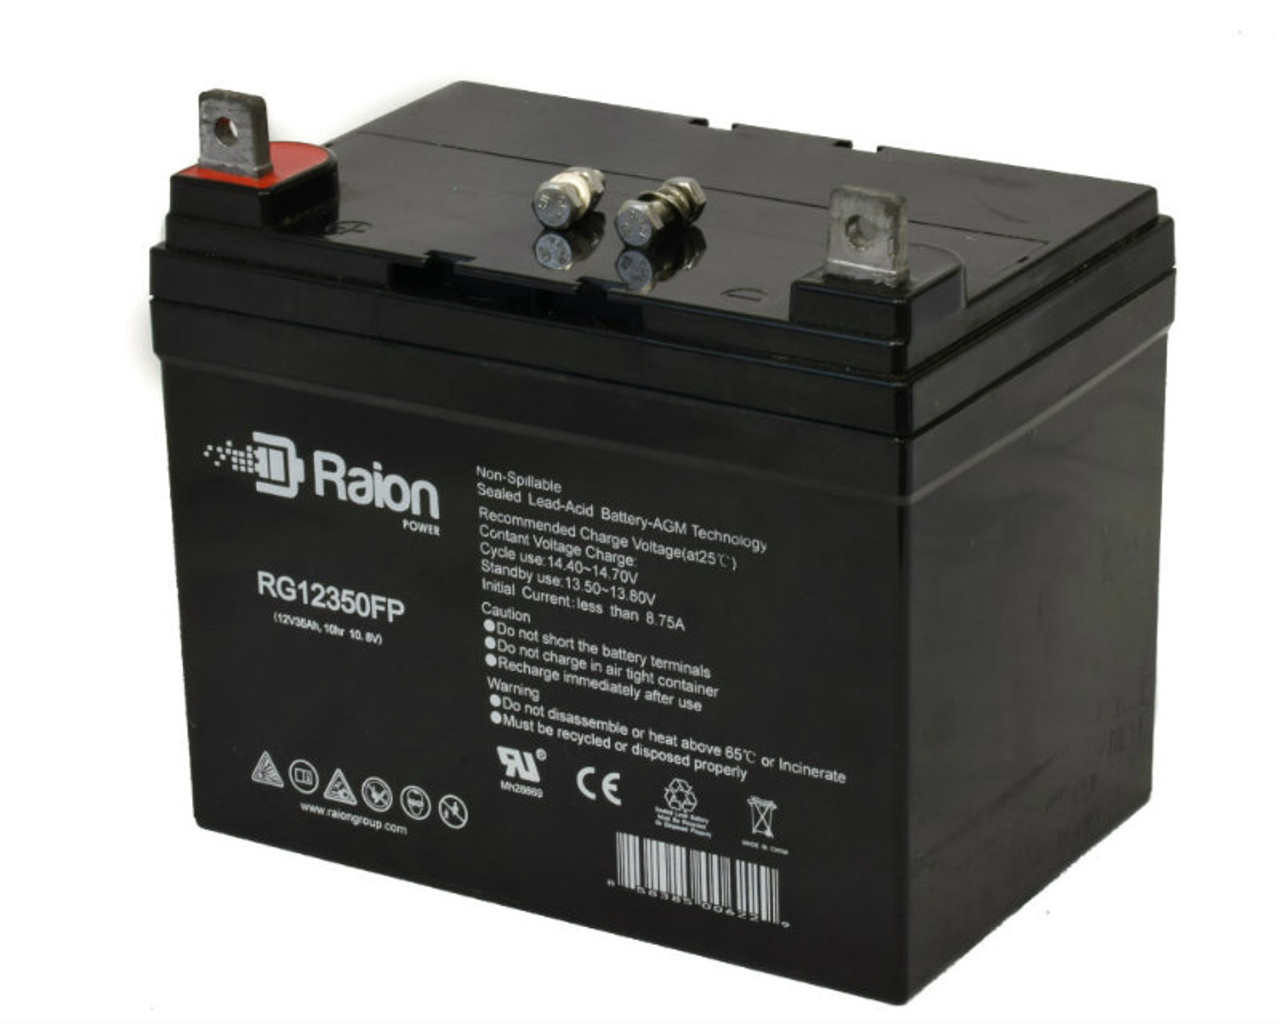 Raion Power Replacement 12V 35Ah RG12350FP Battery for Ingersol Equipment 6018